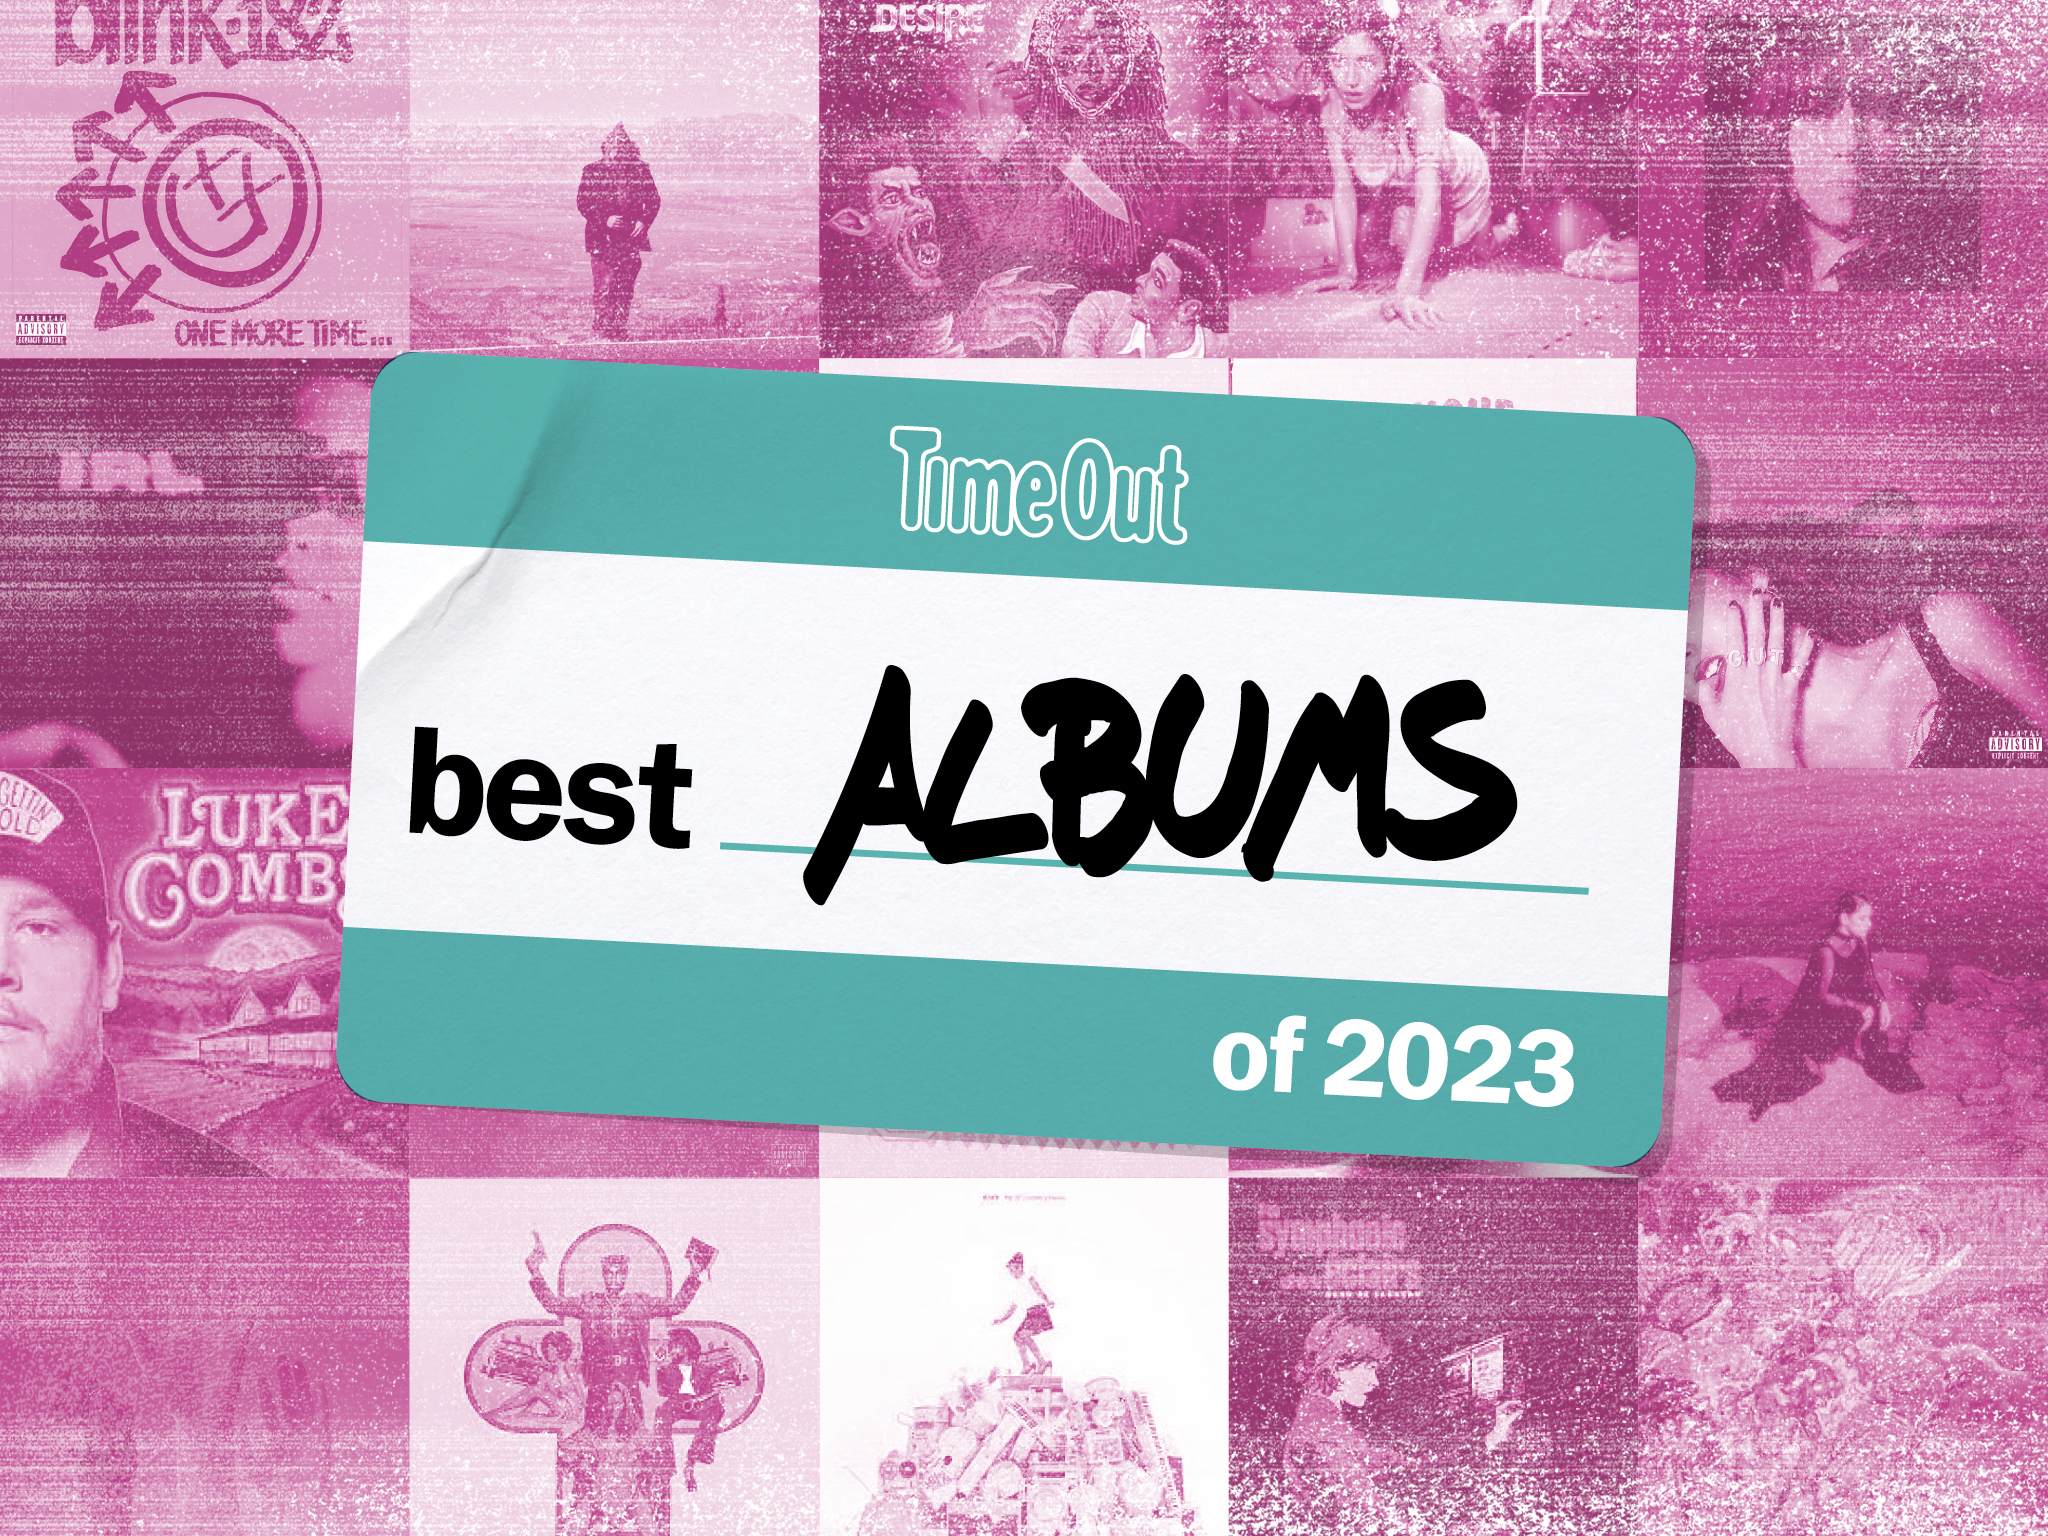 The 30 Best Albums of 2023, According To Time Out